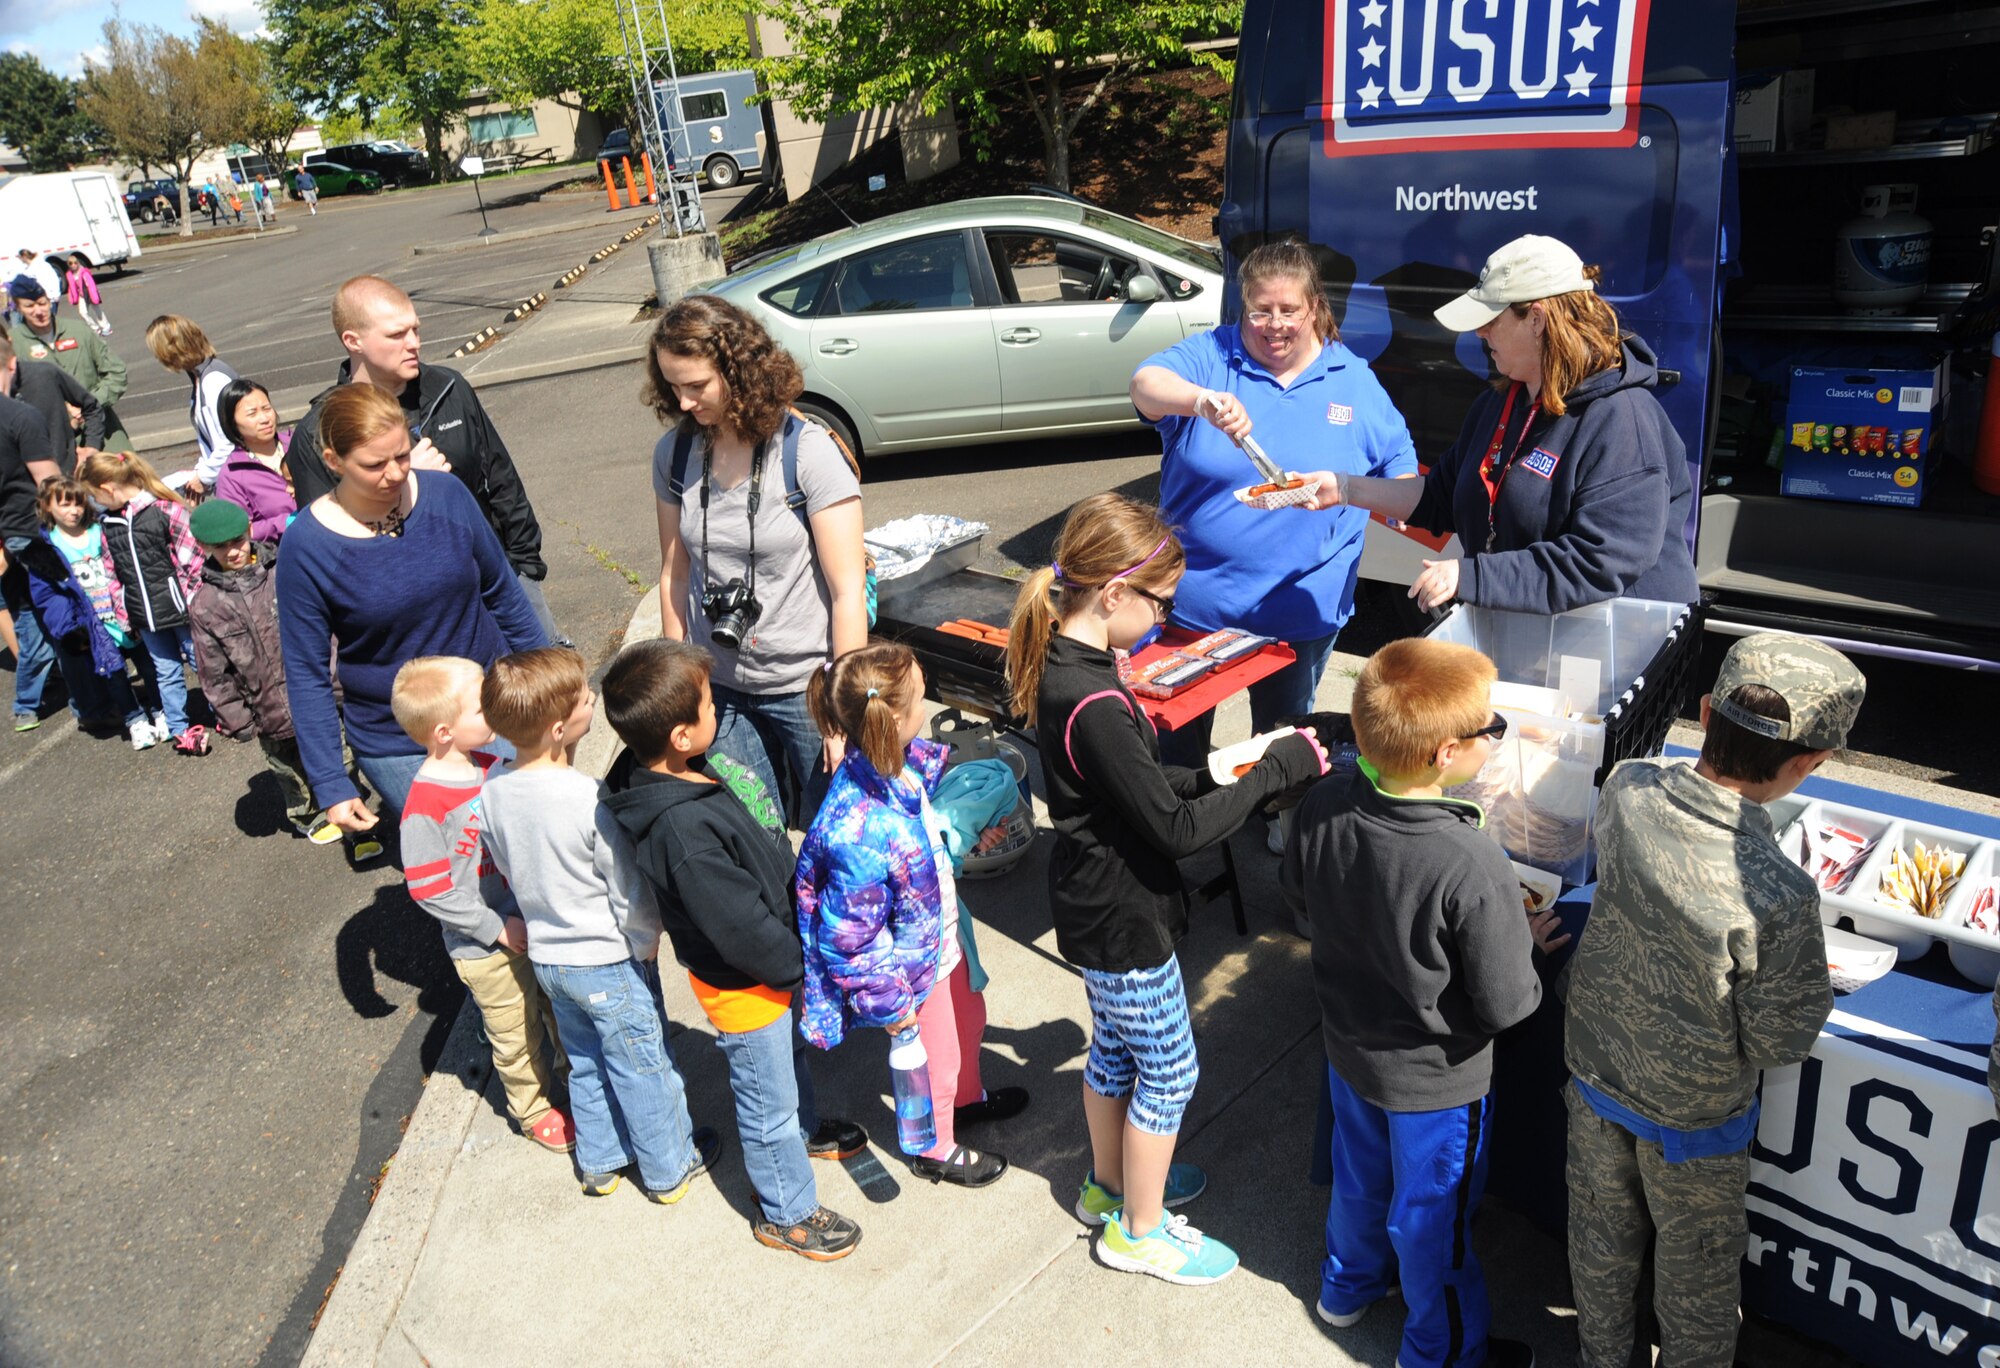 Volunteers from the Unites States Organization (USO) Debbie McDonald and Kristie King prepare and hand out hot dogs and other snacks to kids and families attending ‘Kids Day at PANG,” April 25, 2015, Portland Air National Guard Base, Ore. The Oregon National Guard opened the Portland Air Base to children of military members for a special day of activities highlighting “The Month of the Military Child,” designated since 1986 by the Department of Defense as way to recognize the contribution and personal sacrifices children make to the military. (U.S. Air National Guard photo by Tech. Sgt. John Hughel, 142nd Fighter Wing Public Affairs/Released)